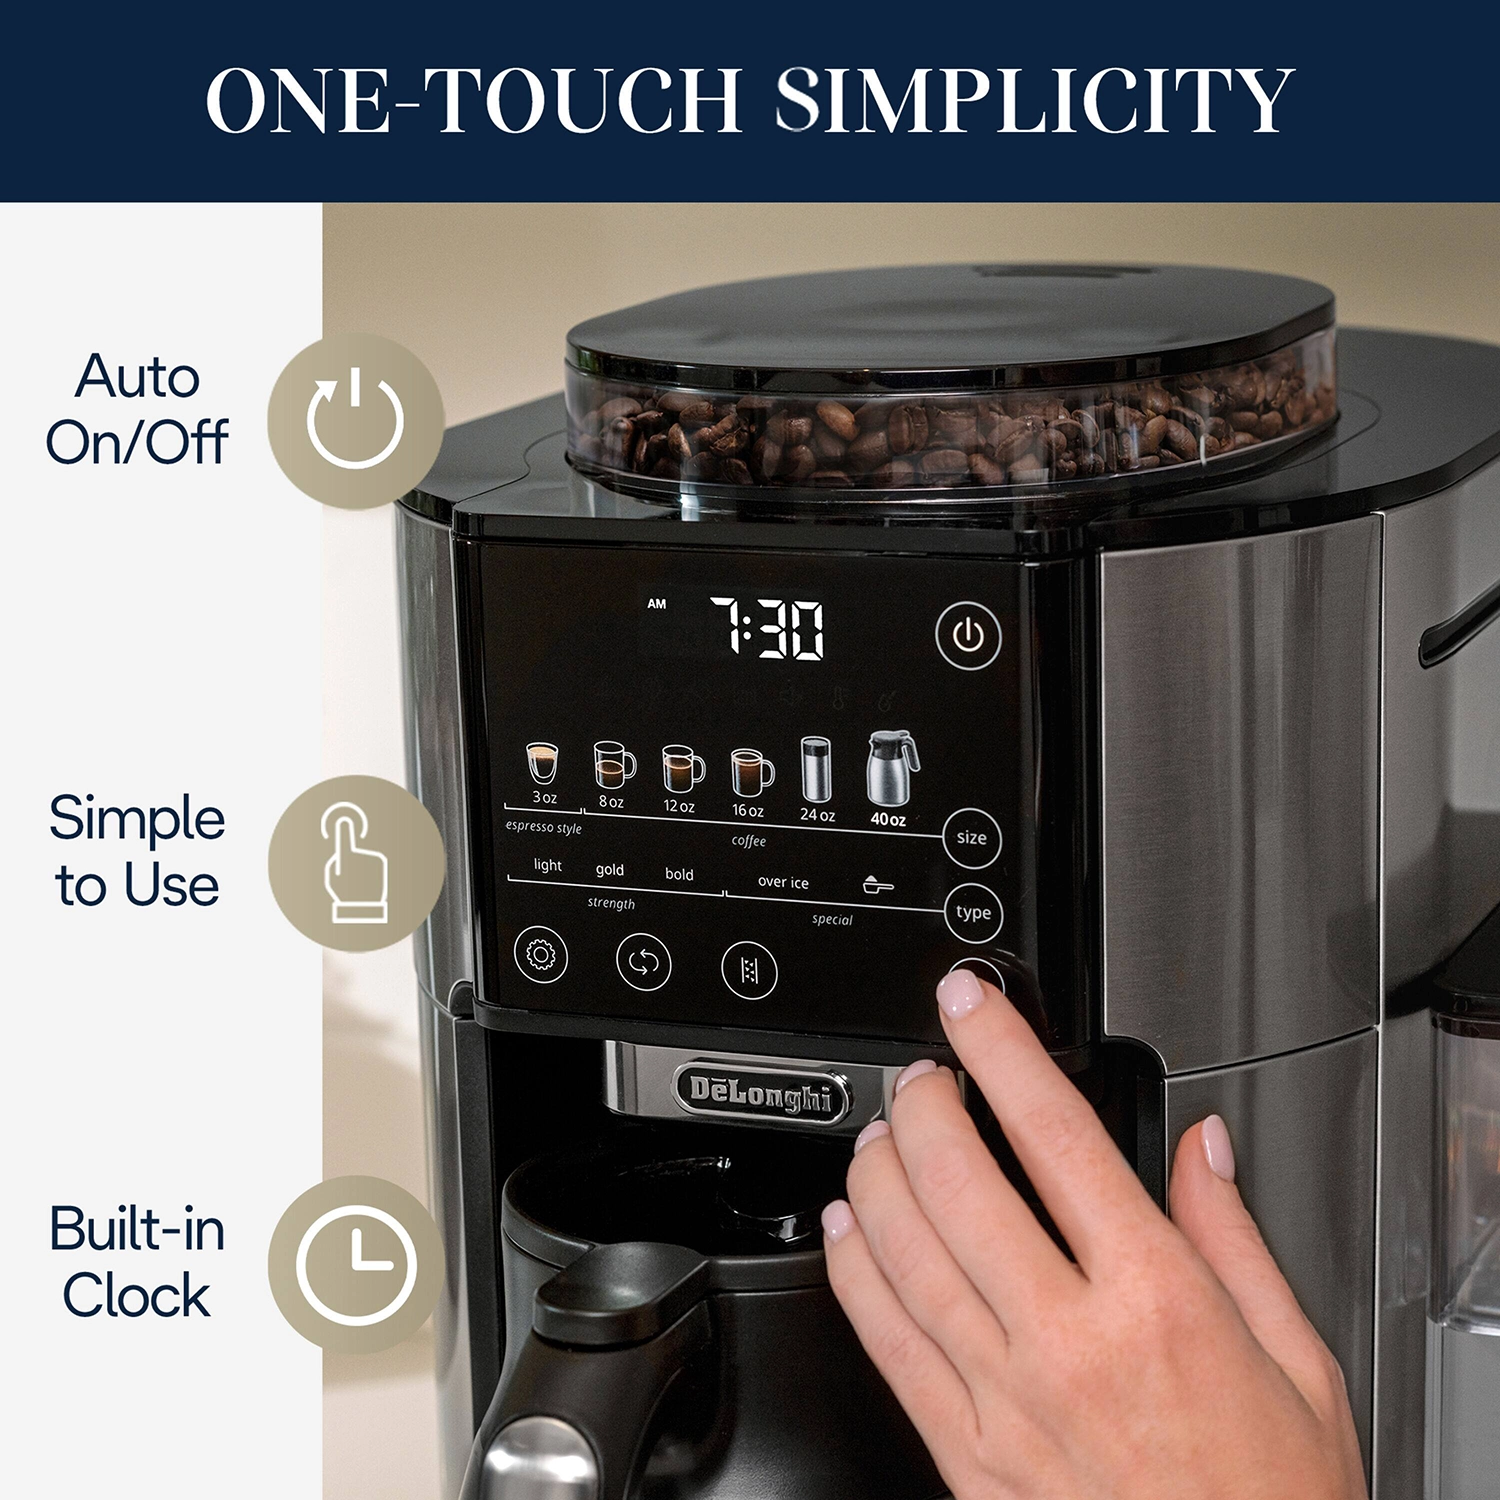 De'longhi Truebrew Automatic Coffee Maker With Bean Extract